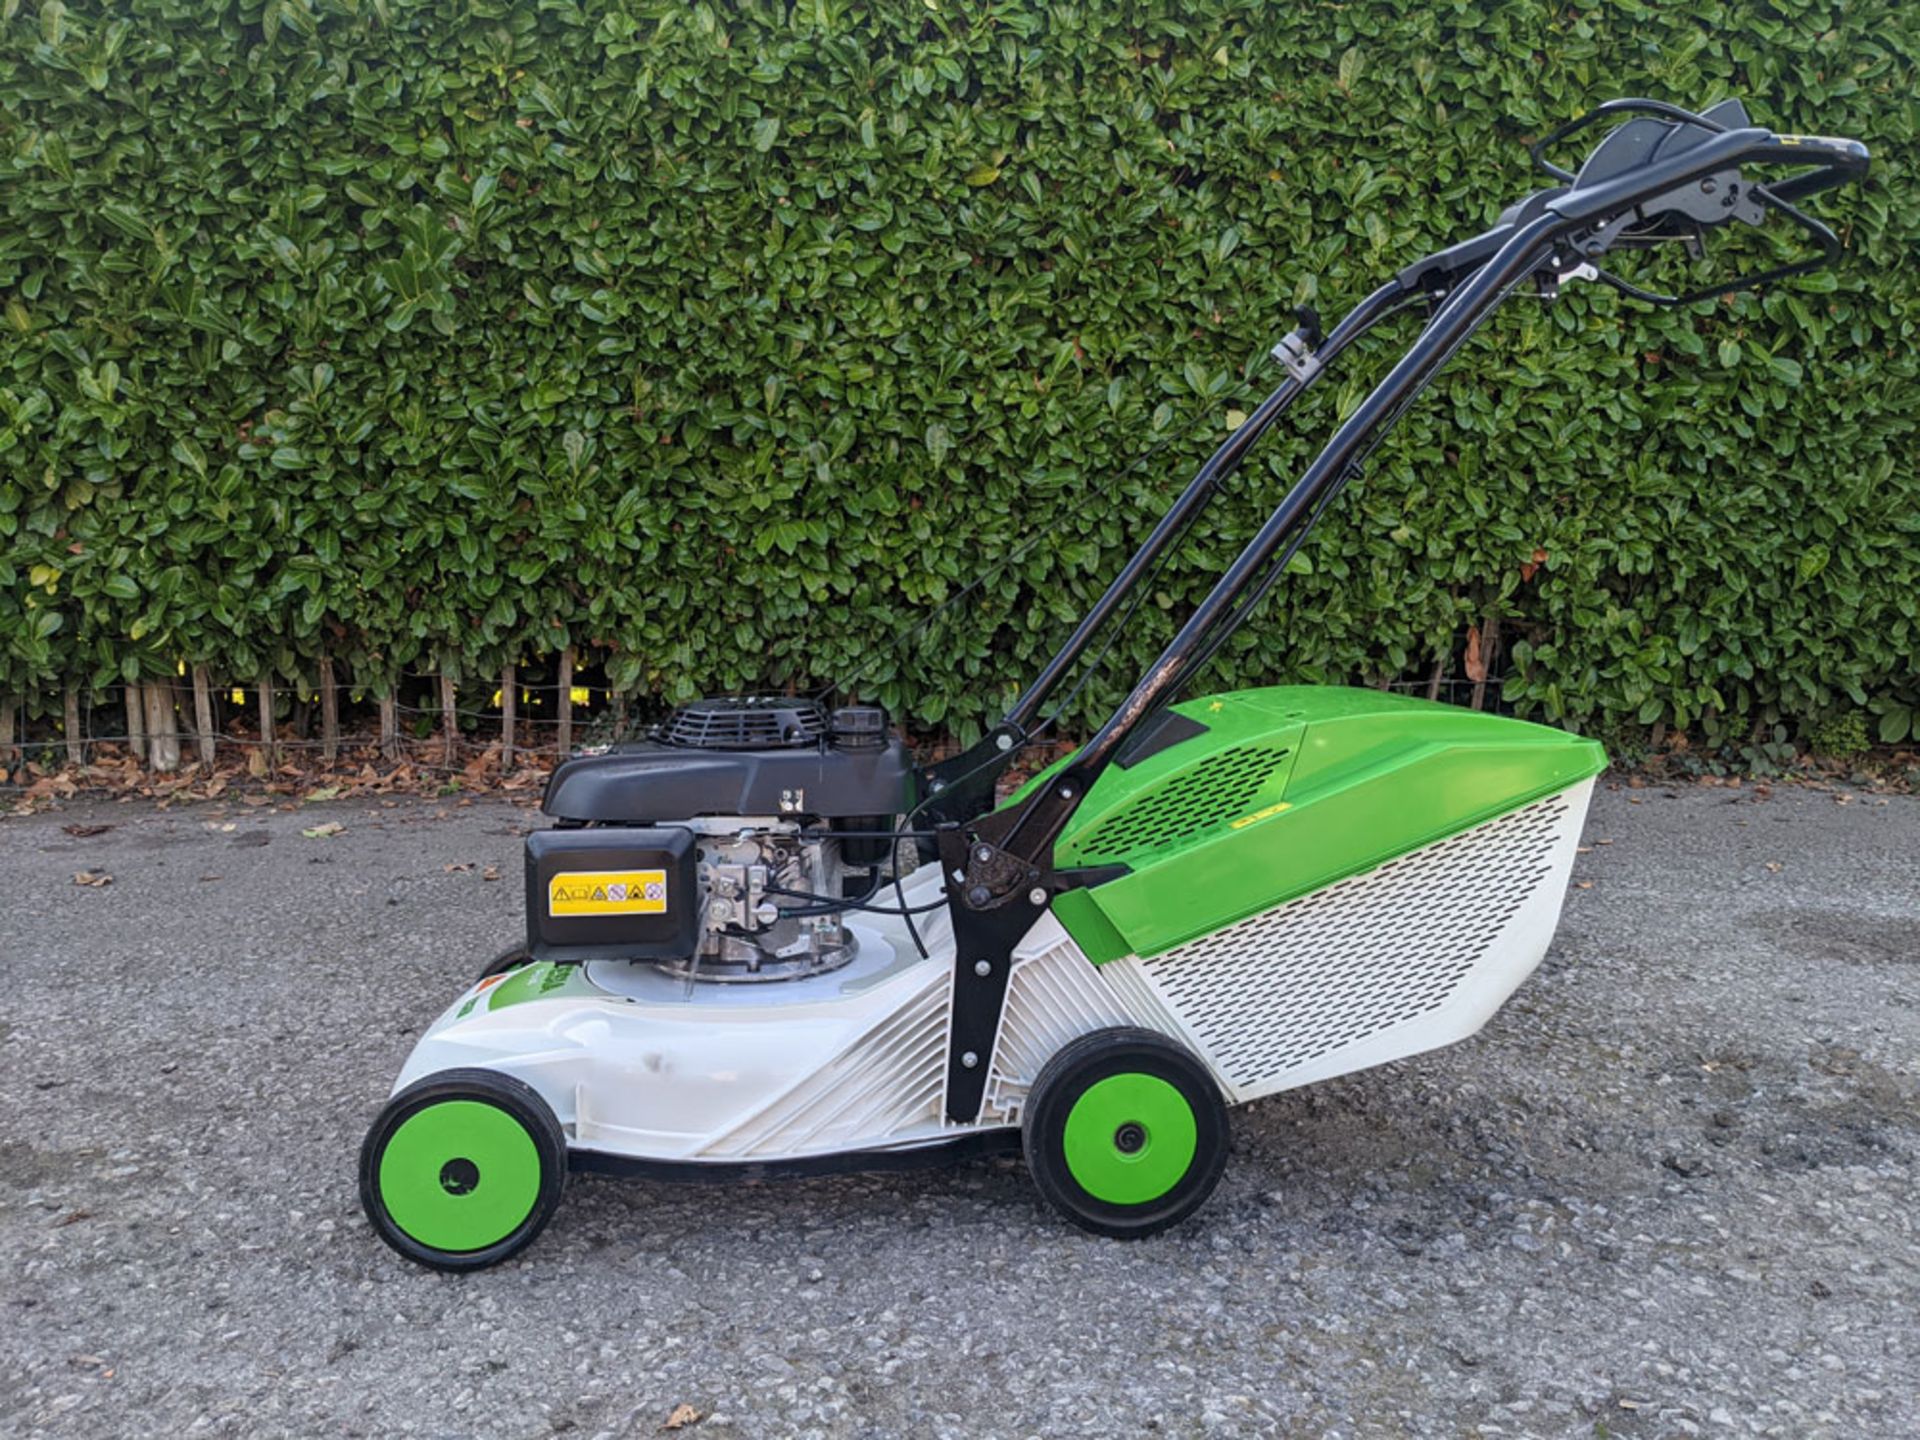 2019 Etesia Pro 46 PHCT 18" Self Propelled Lawn Mower - Image 4 of 5